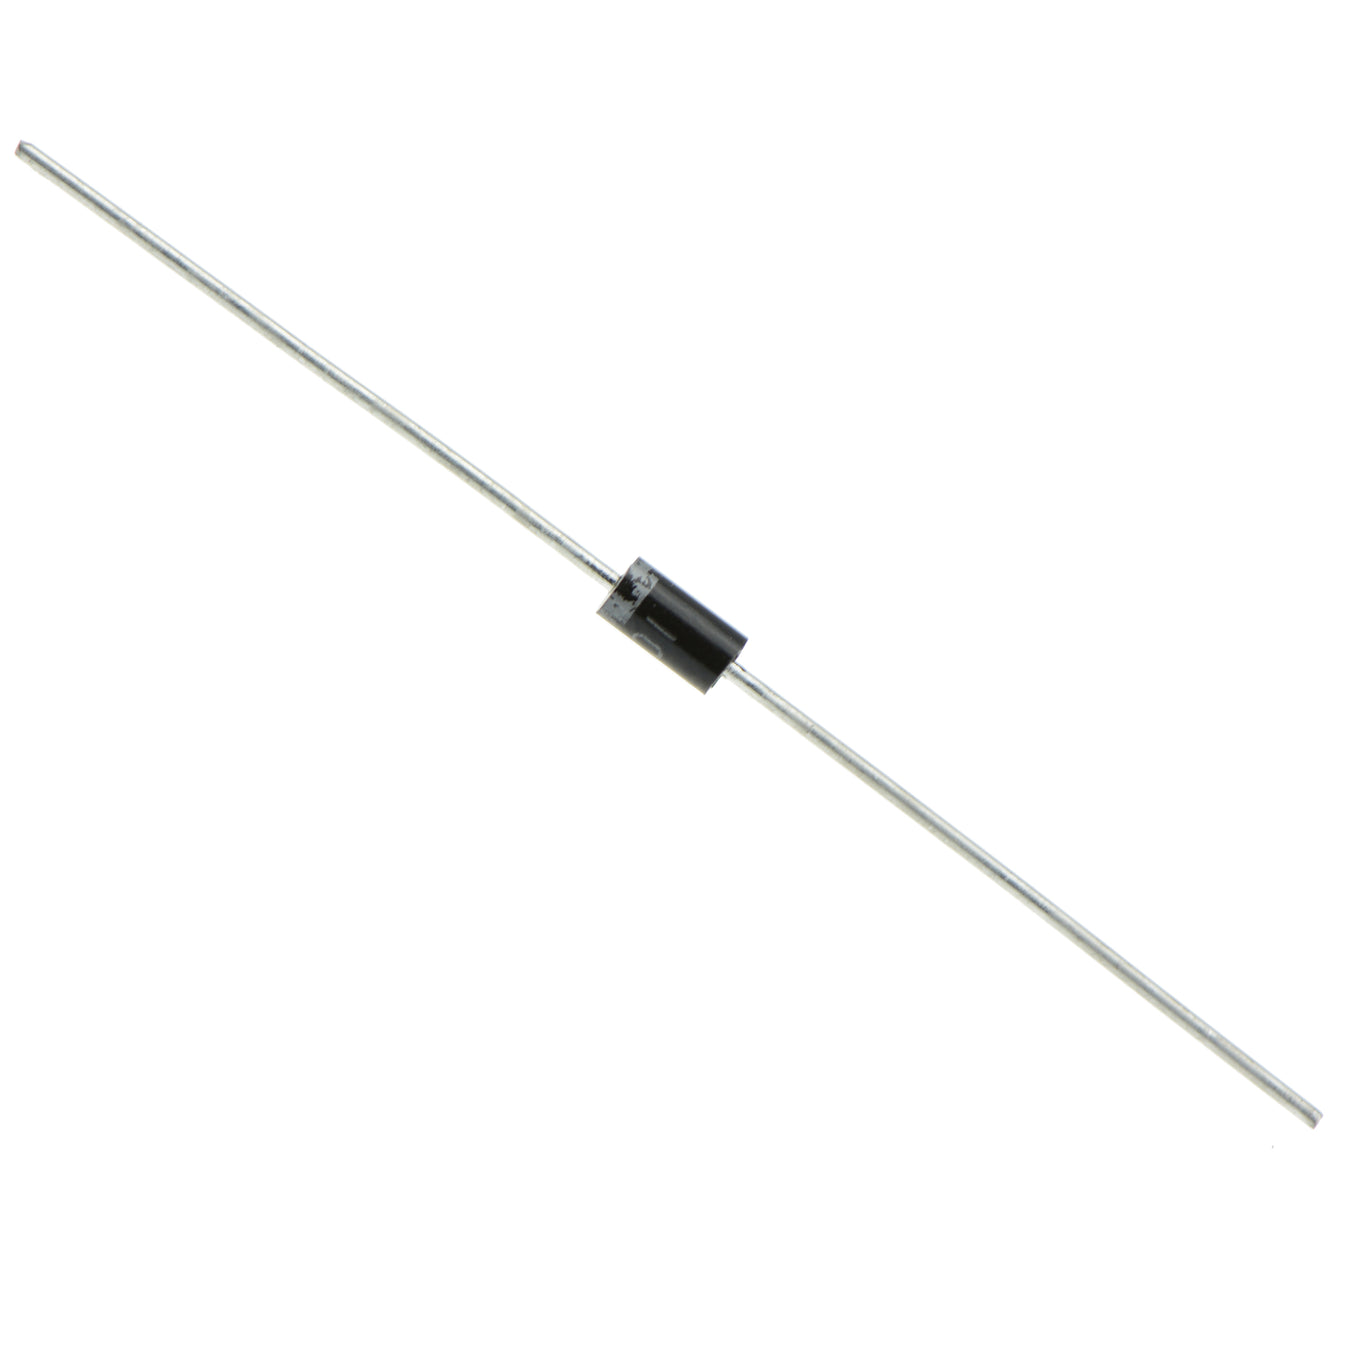 Rectifier Diodes